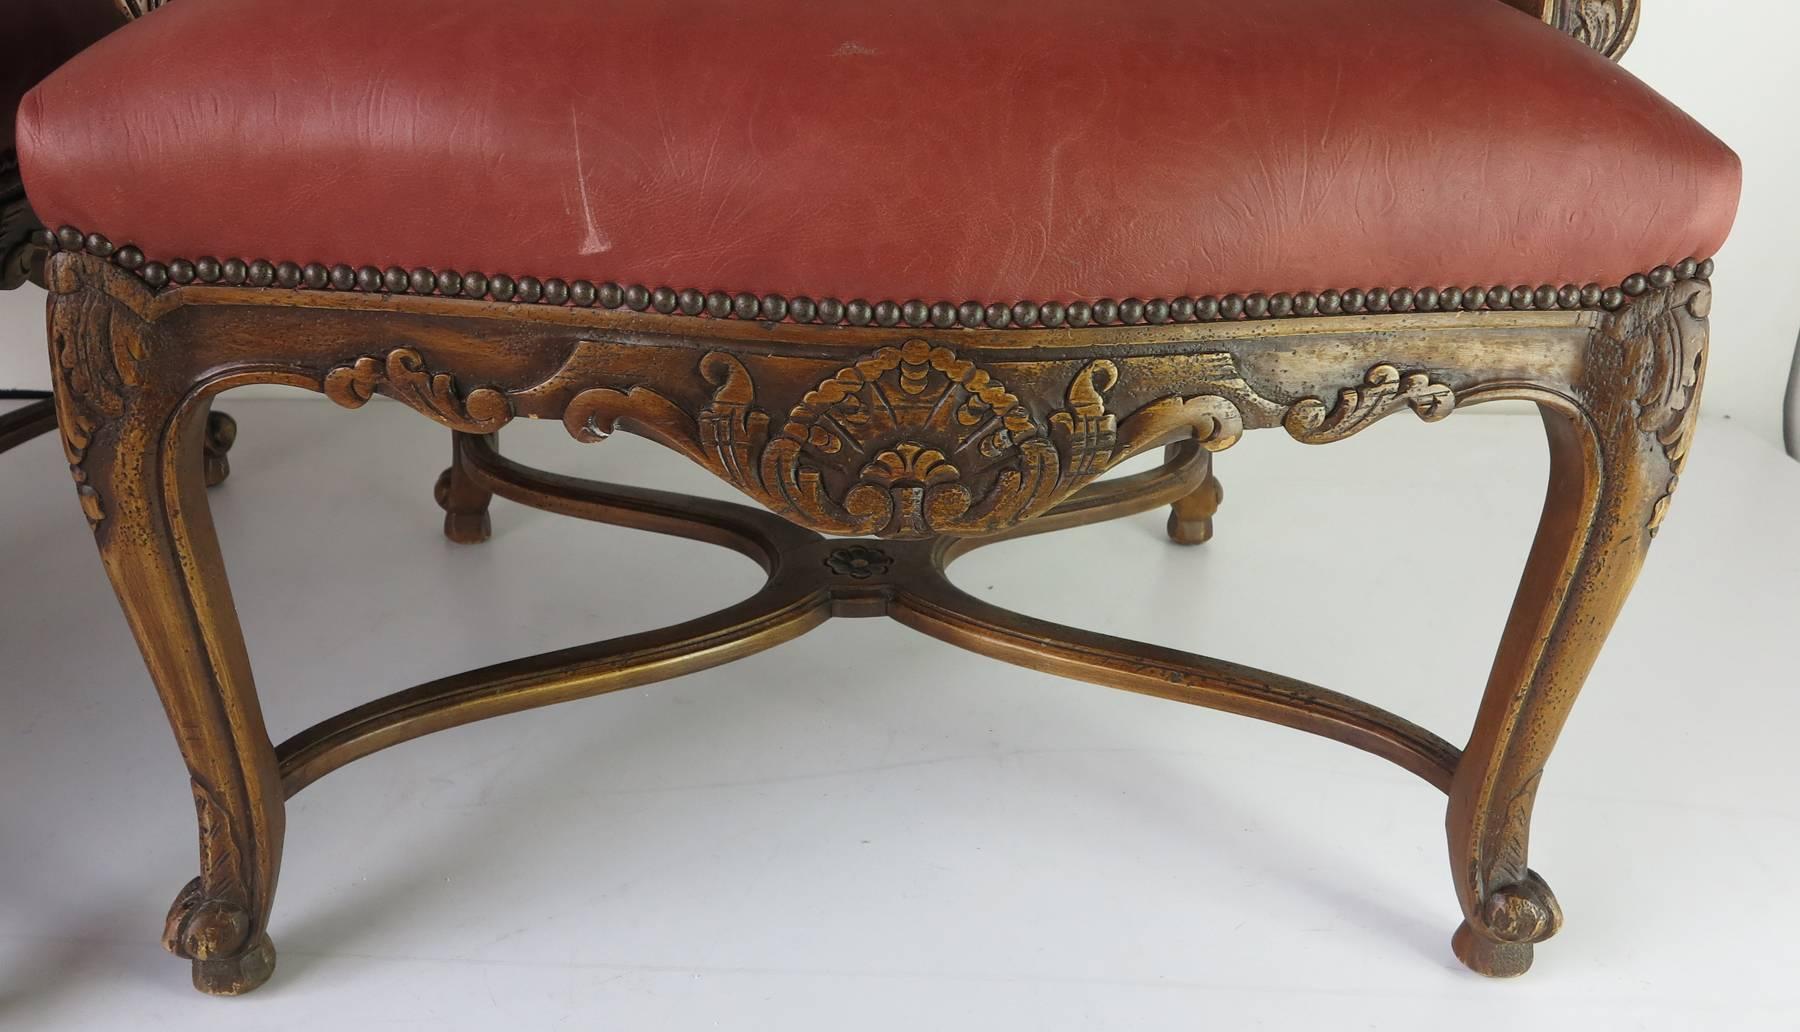 Carved Vintage  Embossed Red  Louis xiv style  Arm Chairs